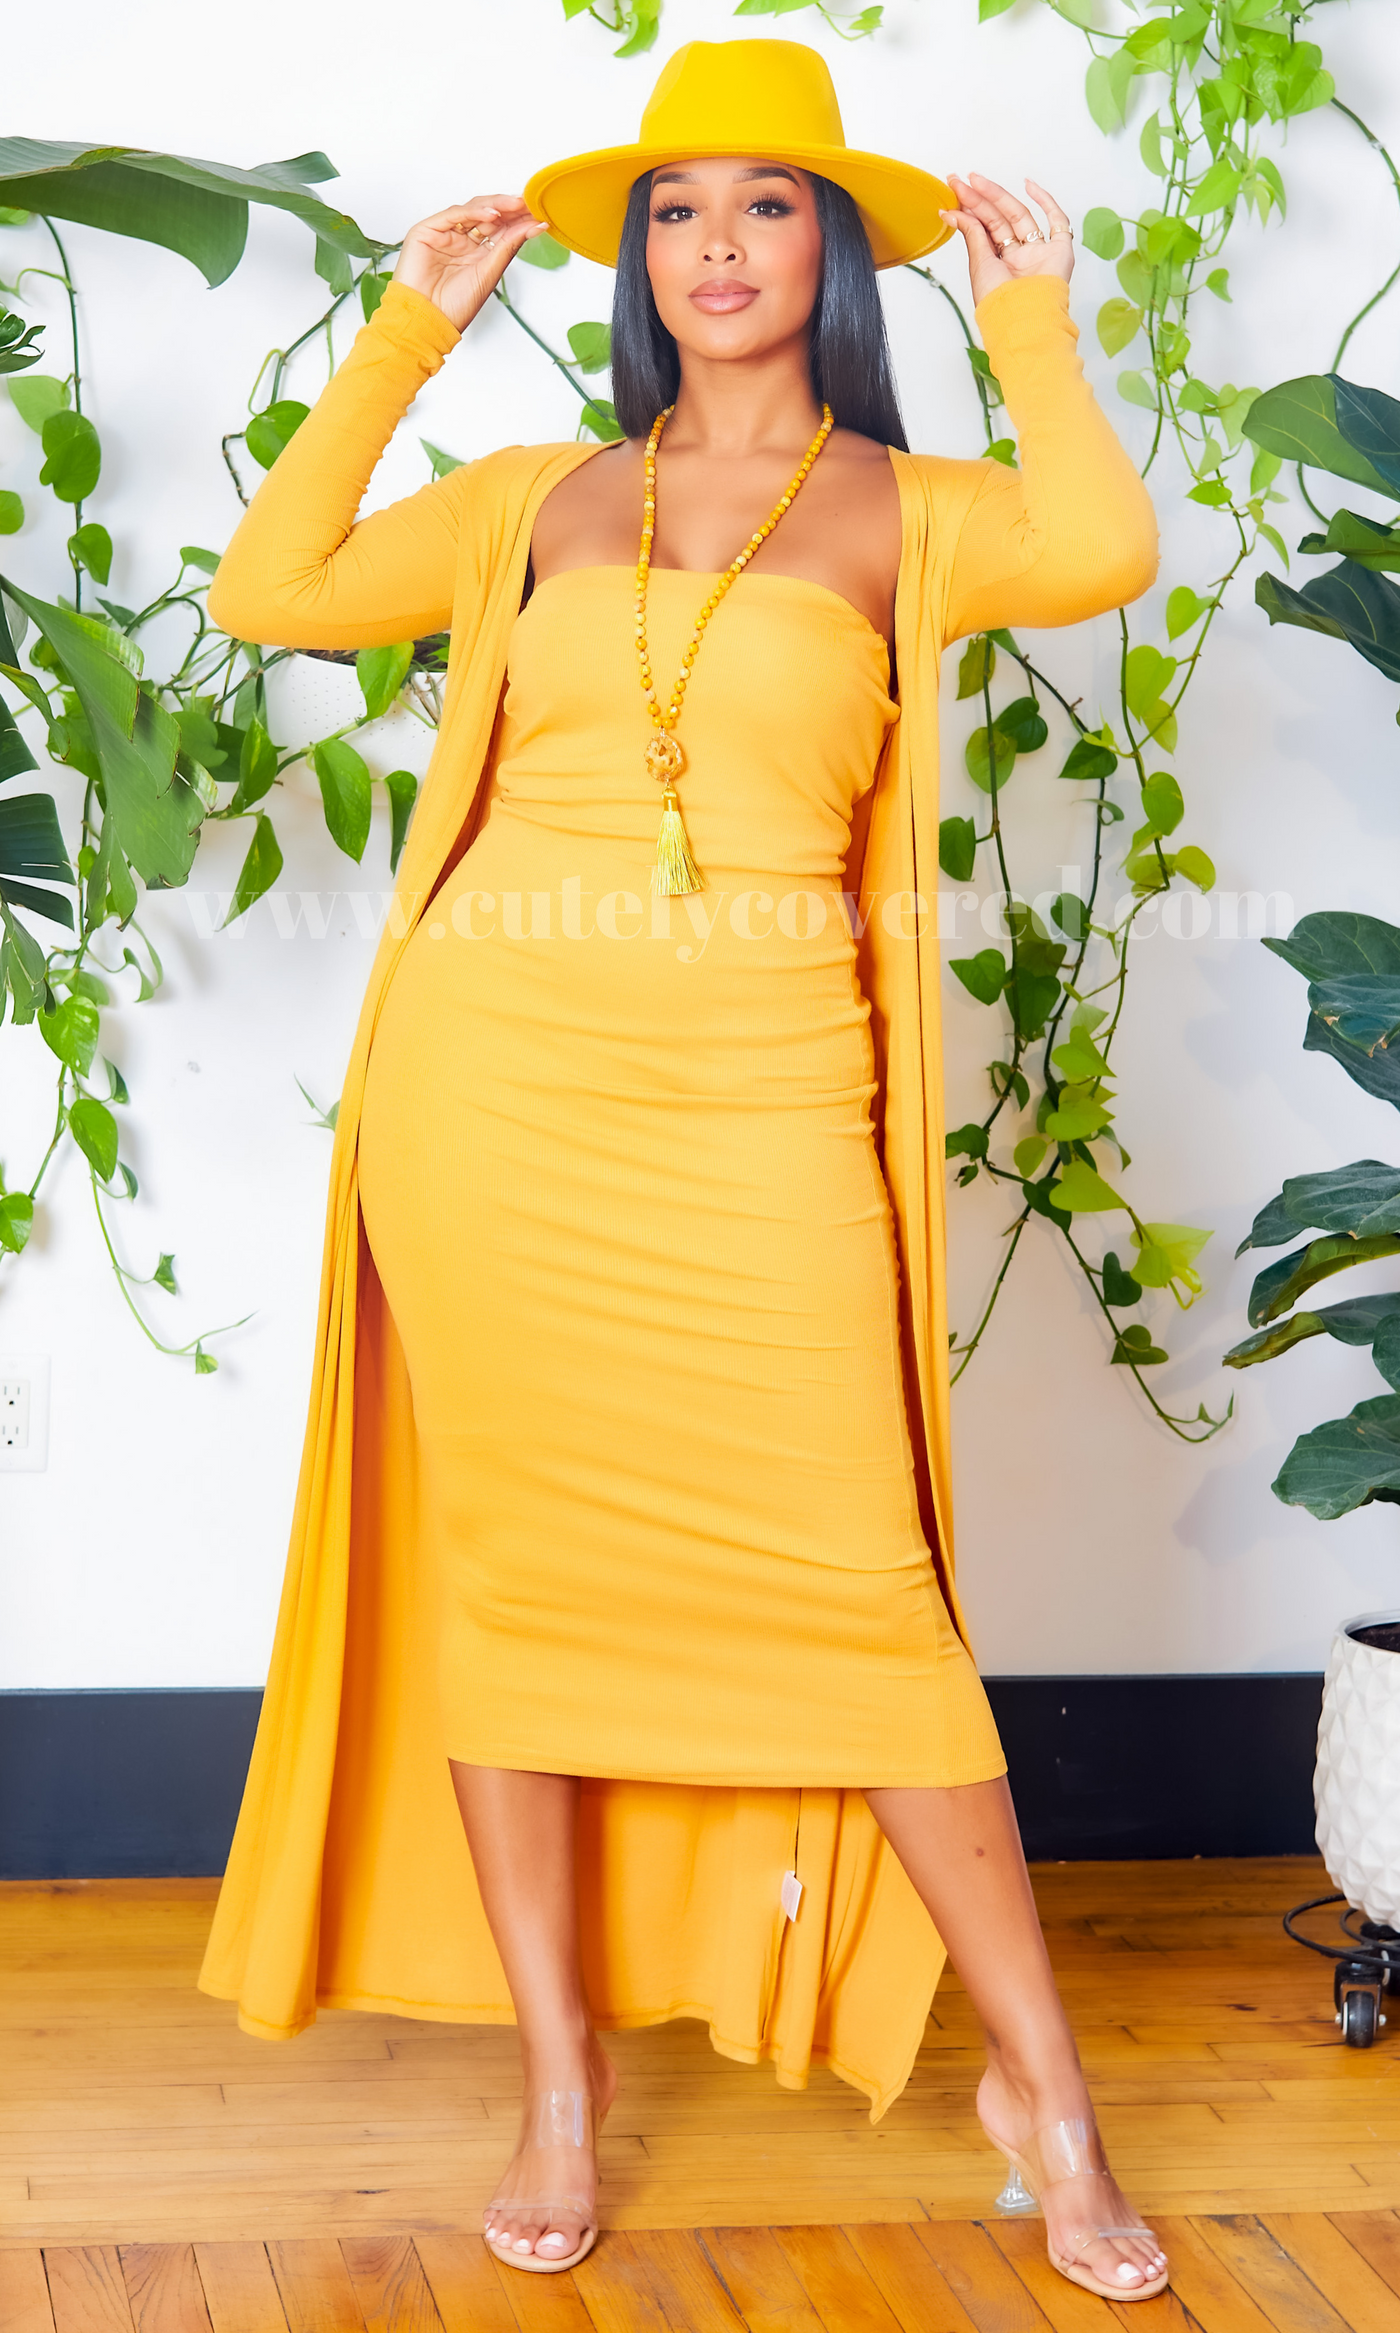 Slay Bae | Cardigan Dress Set - Orange PREORDER ships Early August - Cutely Covered